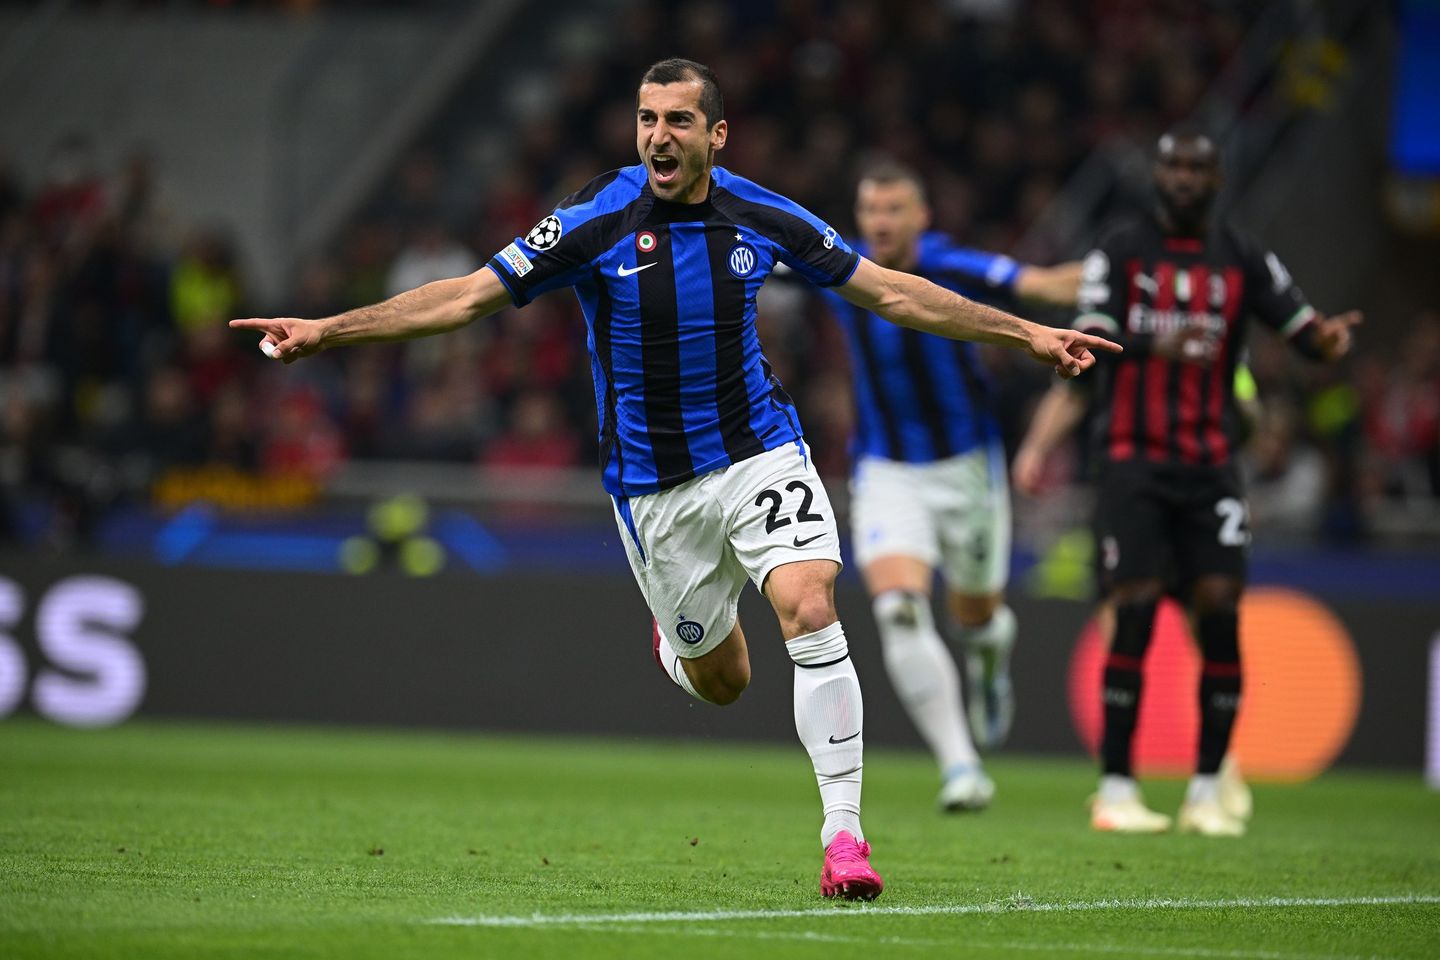 Mkhitaryan named Man of the Match against Milan, says “Inter don’t think about Champions League final”